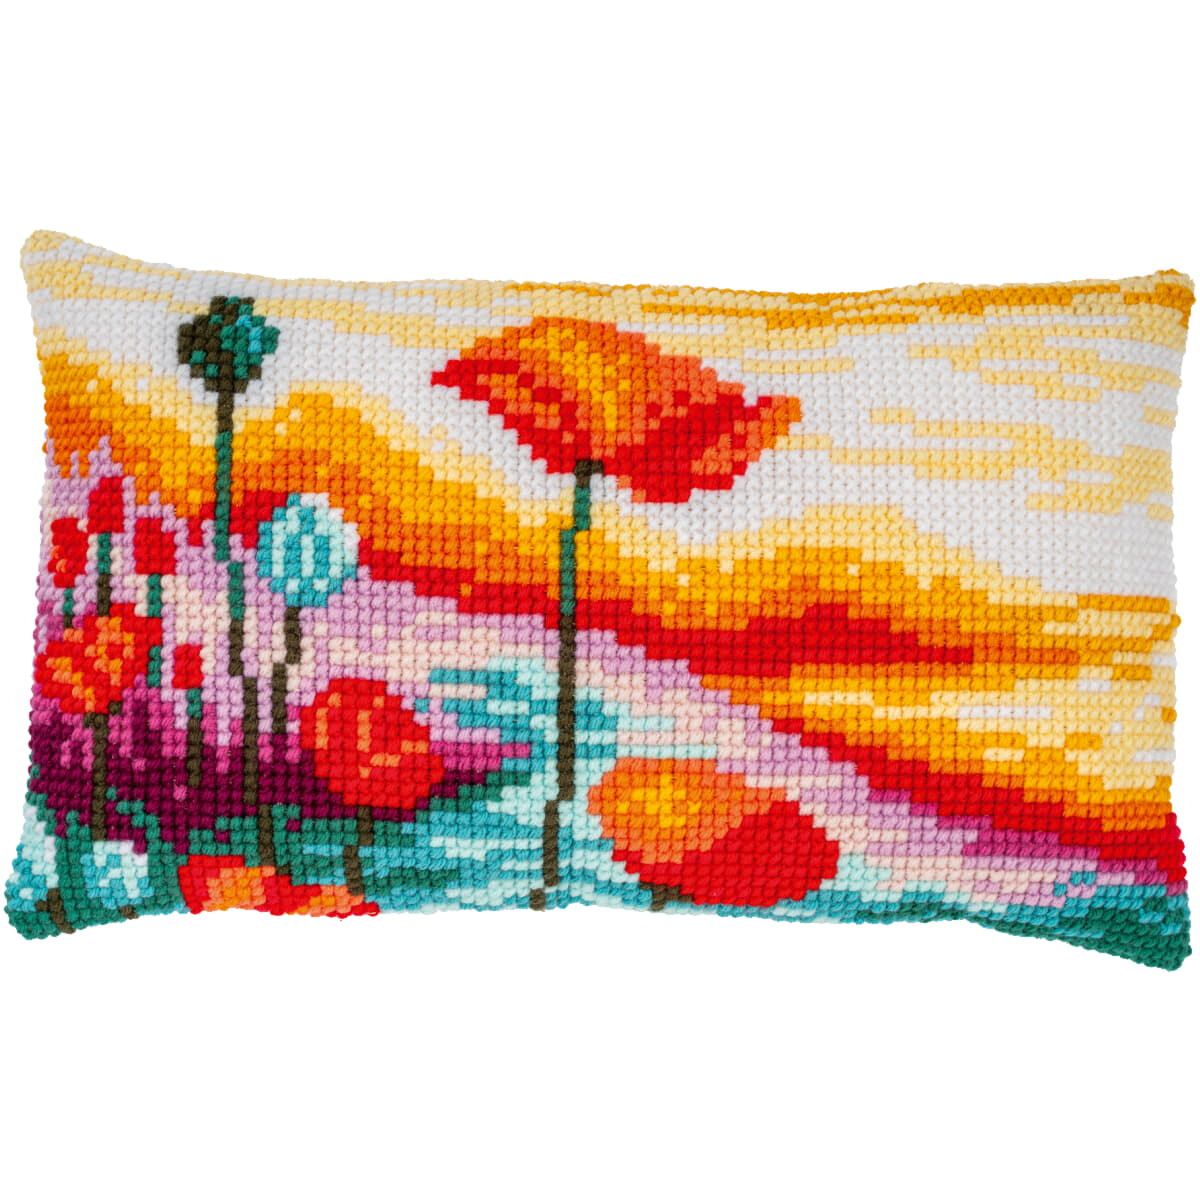 Vervaco stamped cross stitch kit cushion "Poppies...